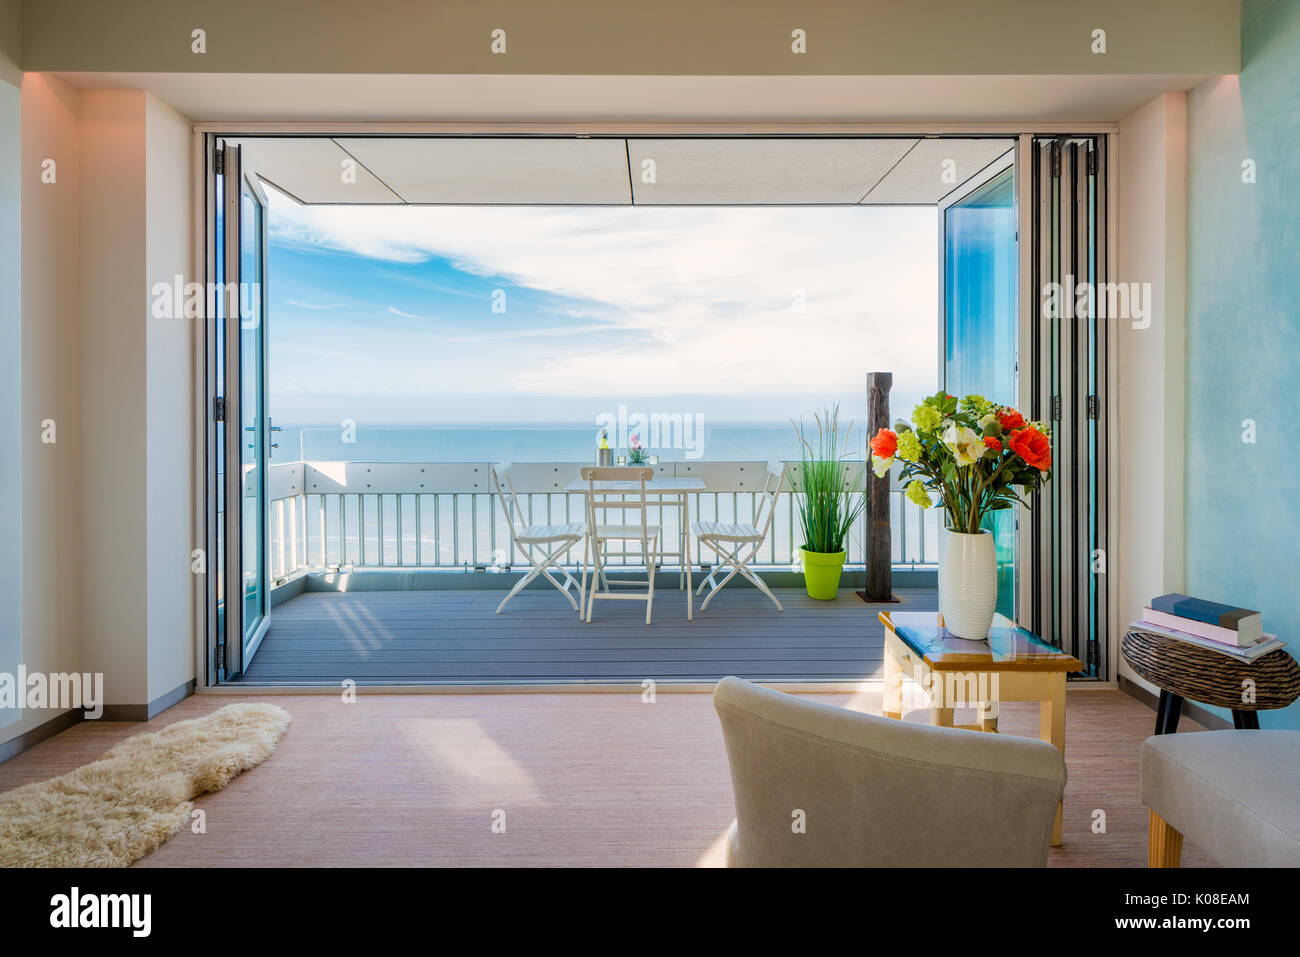 Modern Apartment with Balcony Looking Out over Sea Stock Photo